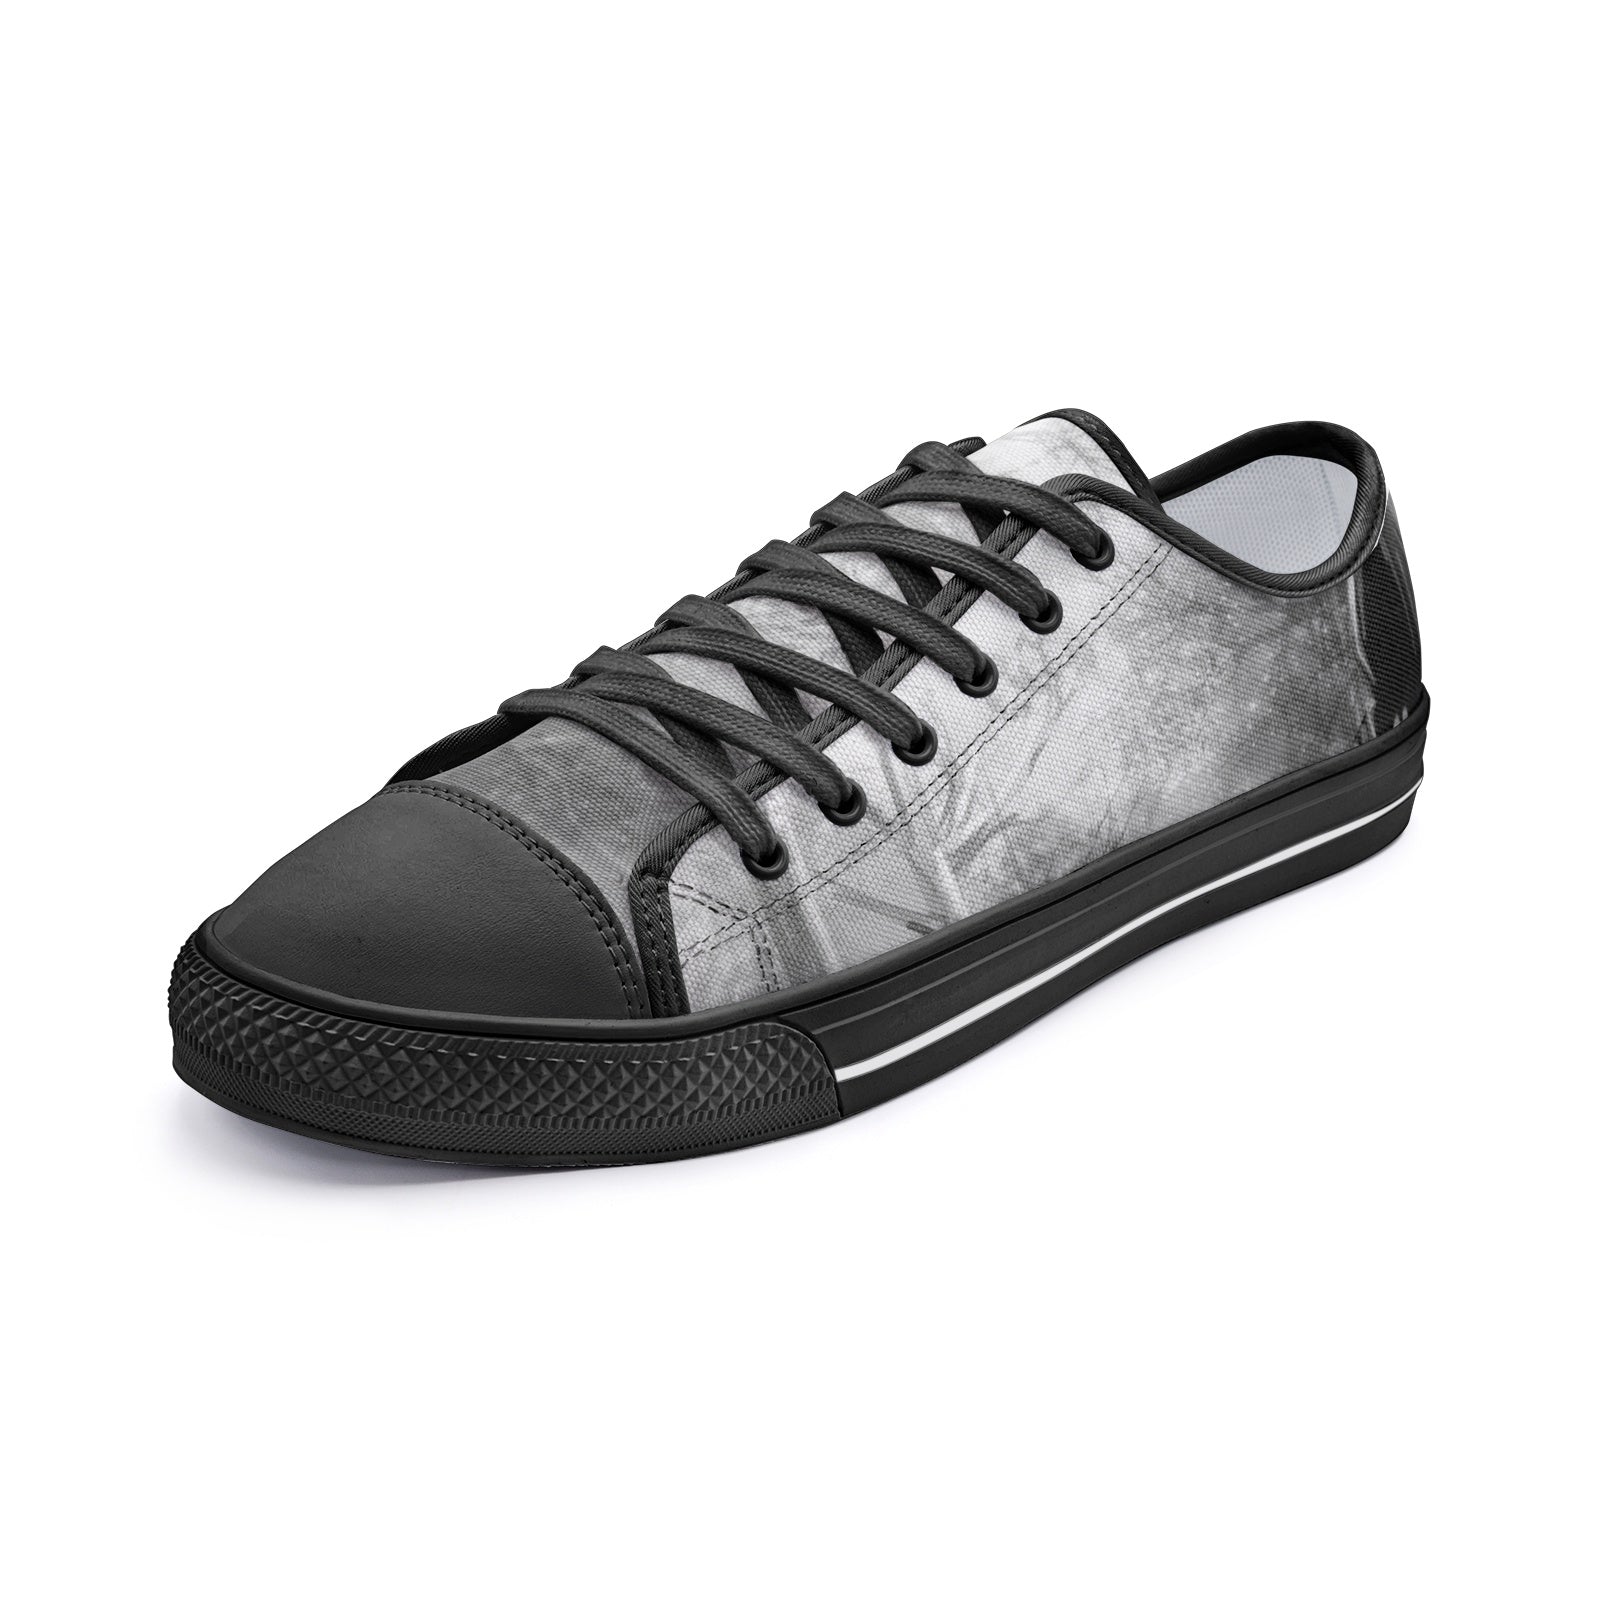 Ghost Unisex Low Top Canvas Shoes